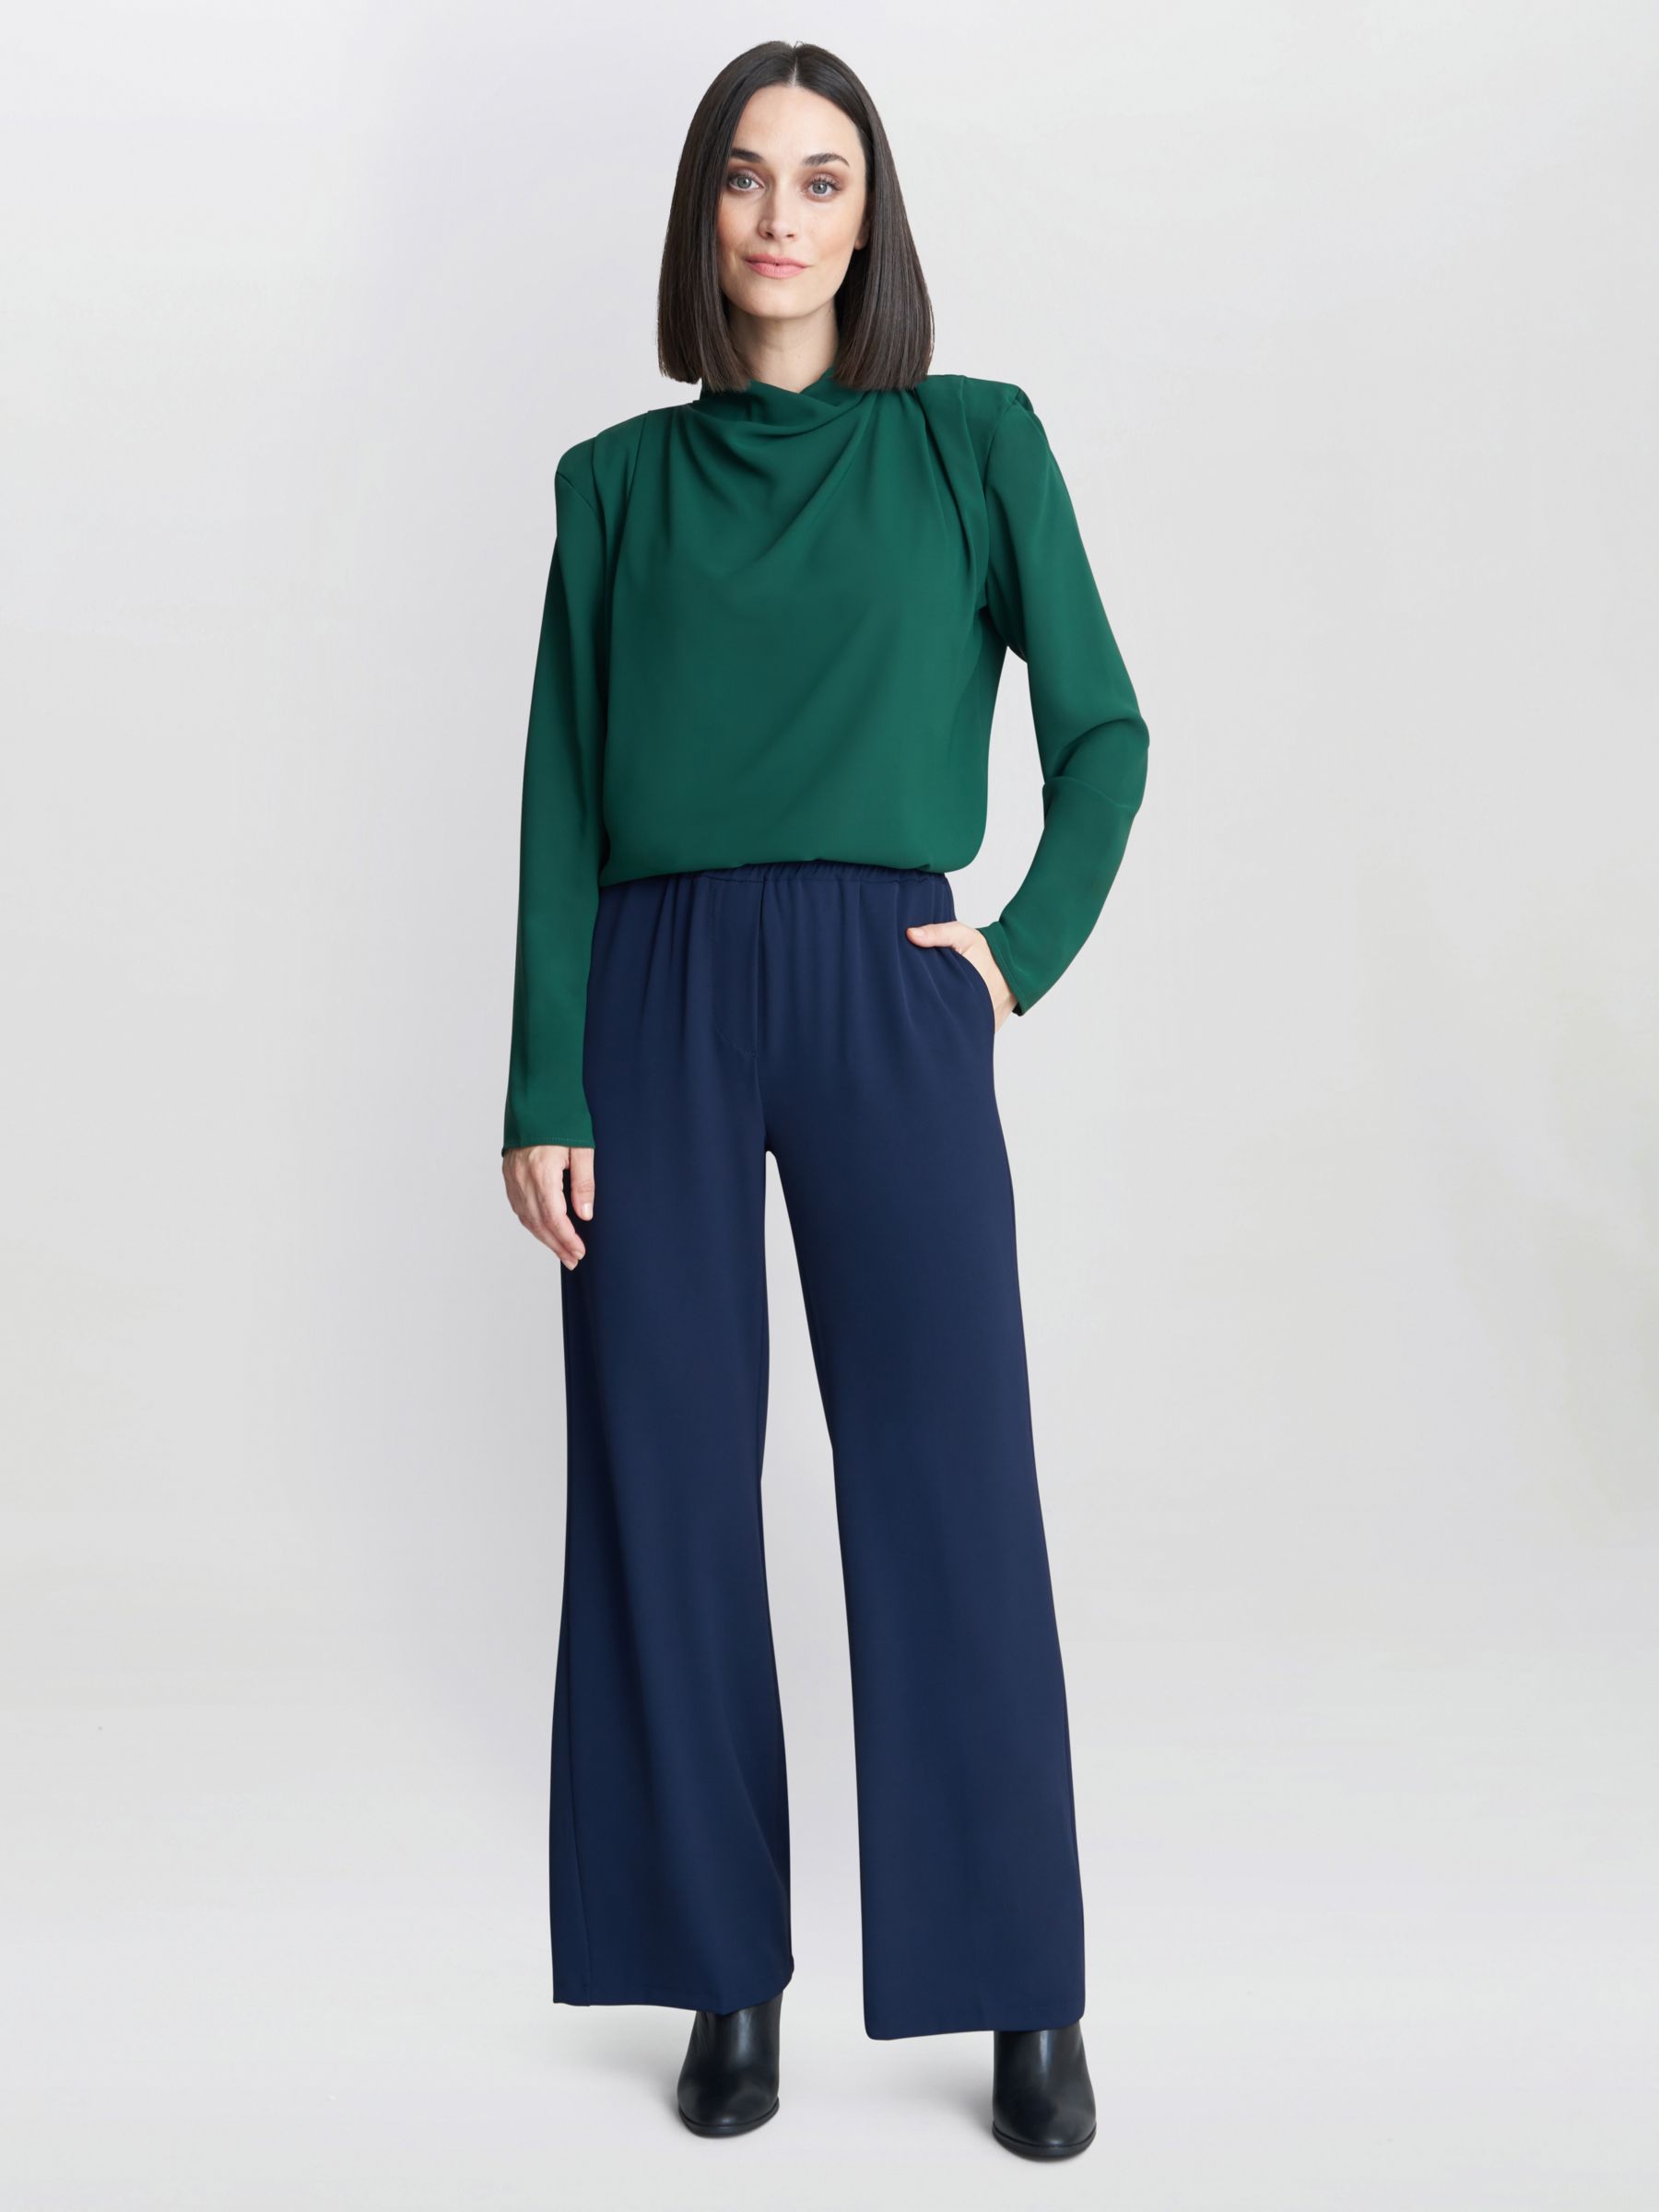 Gina Bacconi  Annika Crepe Pull On Trousers, Navy, S